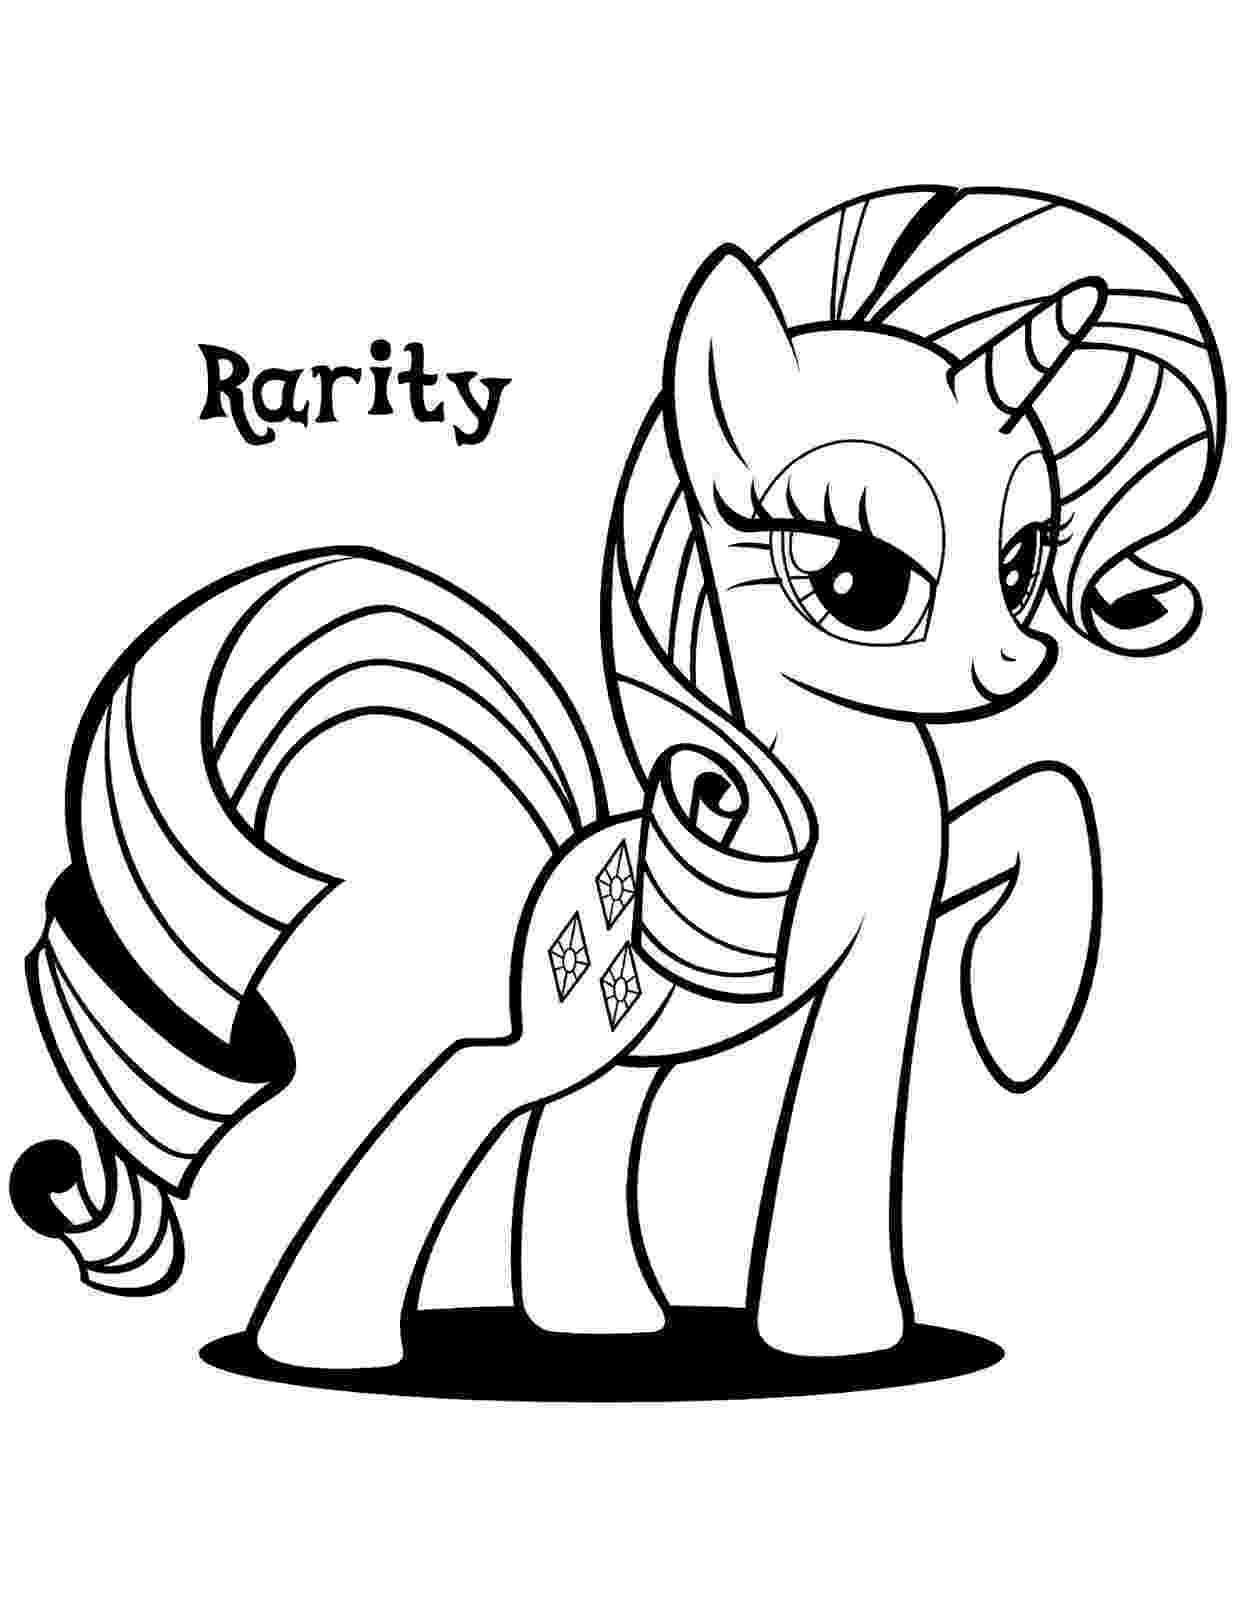 my little pony rarity coloring pages my little pony rarity coloring pages little pony my coloring rarity pages 